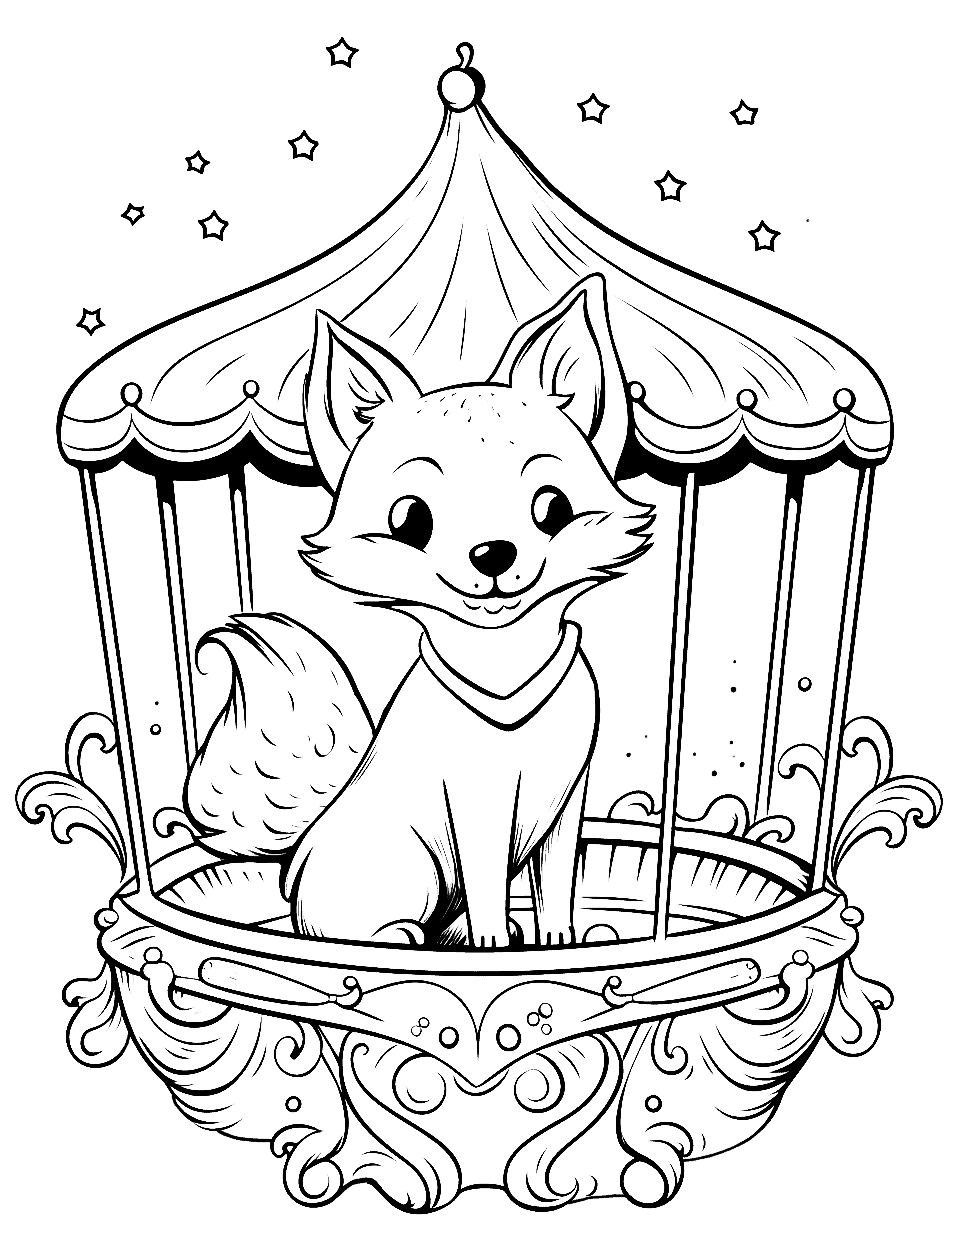 Fox's Magical Carousel Ride Fox Coloring Page - Riding a dazzling carousel, our fox enjoys the magical carnival.